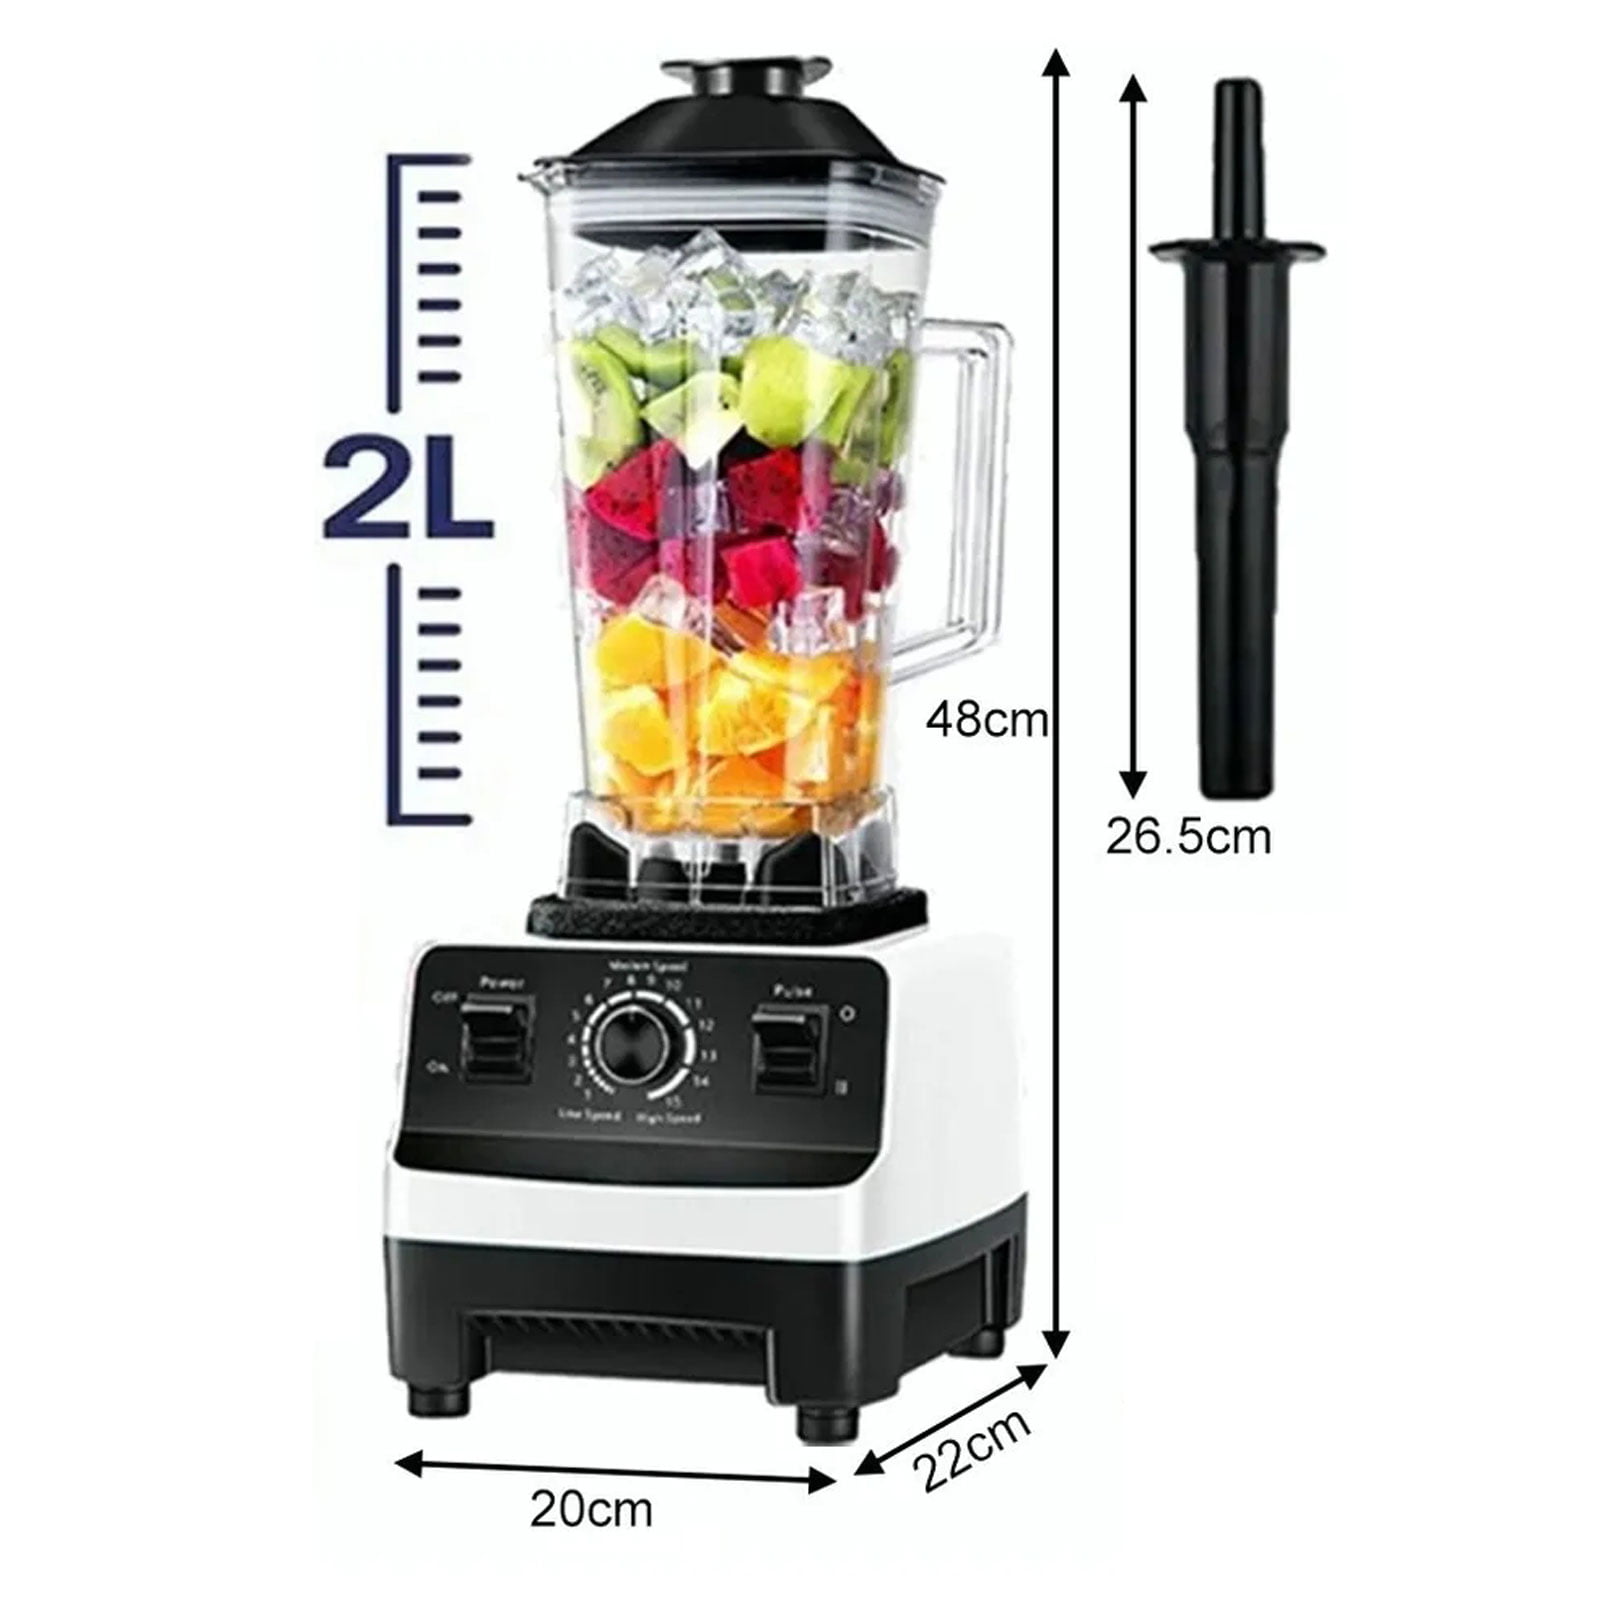 Blender For Kitchen Free Shipping 4500w Portable Blenders Electric Juicer  Food Processors Chopping Mixers Mixer Accessories Home - Blenders -  AliExpress